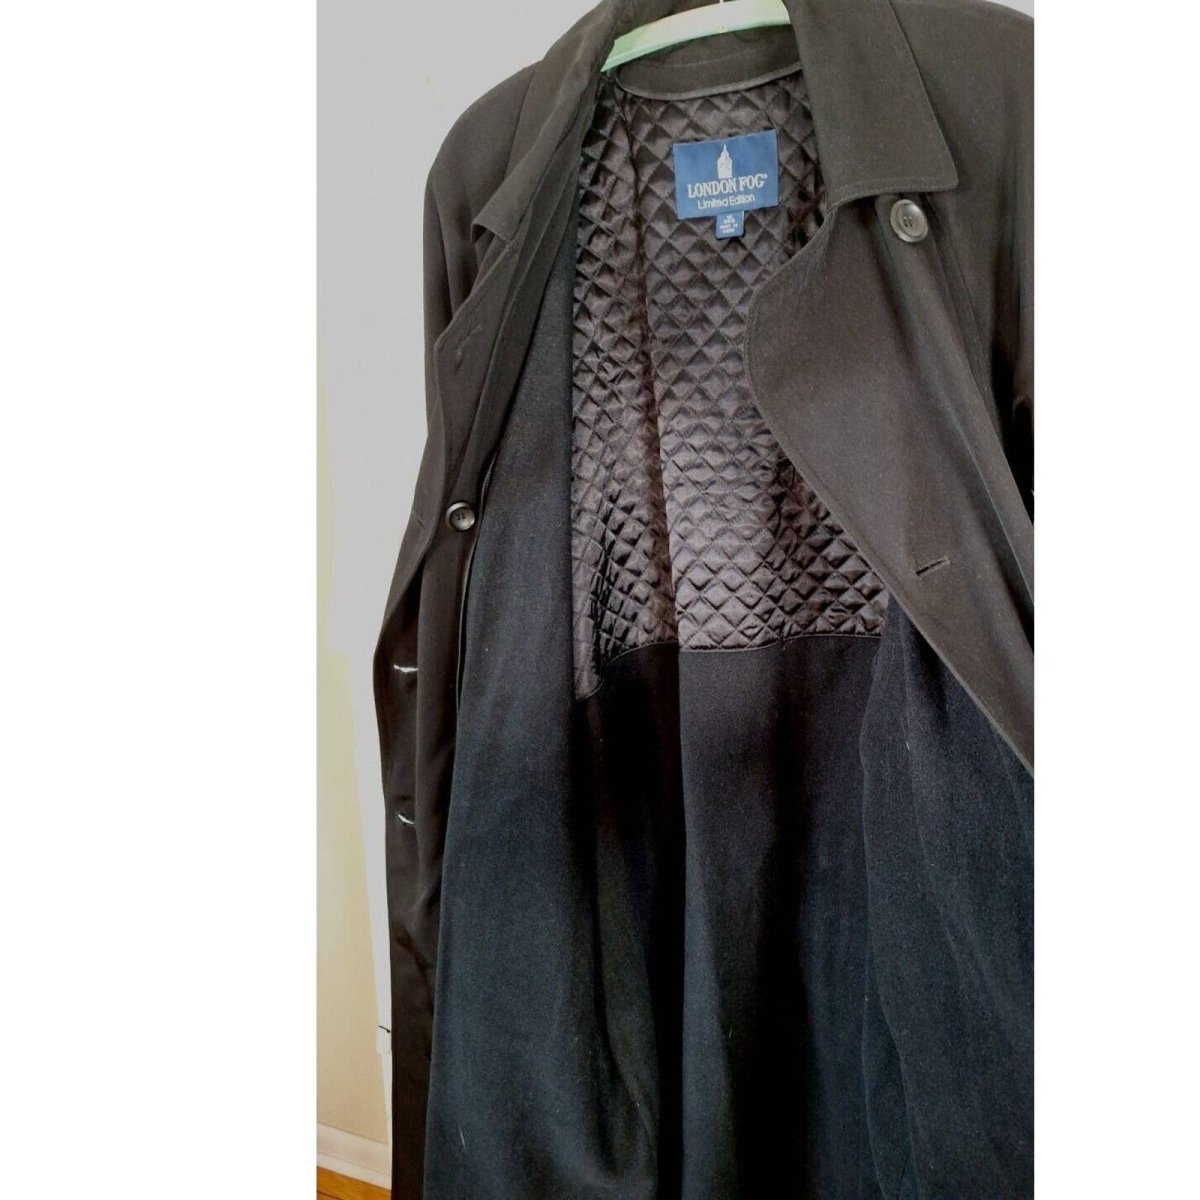 Vintage 1998 Limited Edition London Fog Black Trench Coat Women's Size 16 Chest up to 52" - themallvintage The Mall Vintage